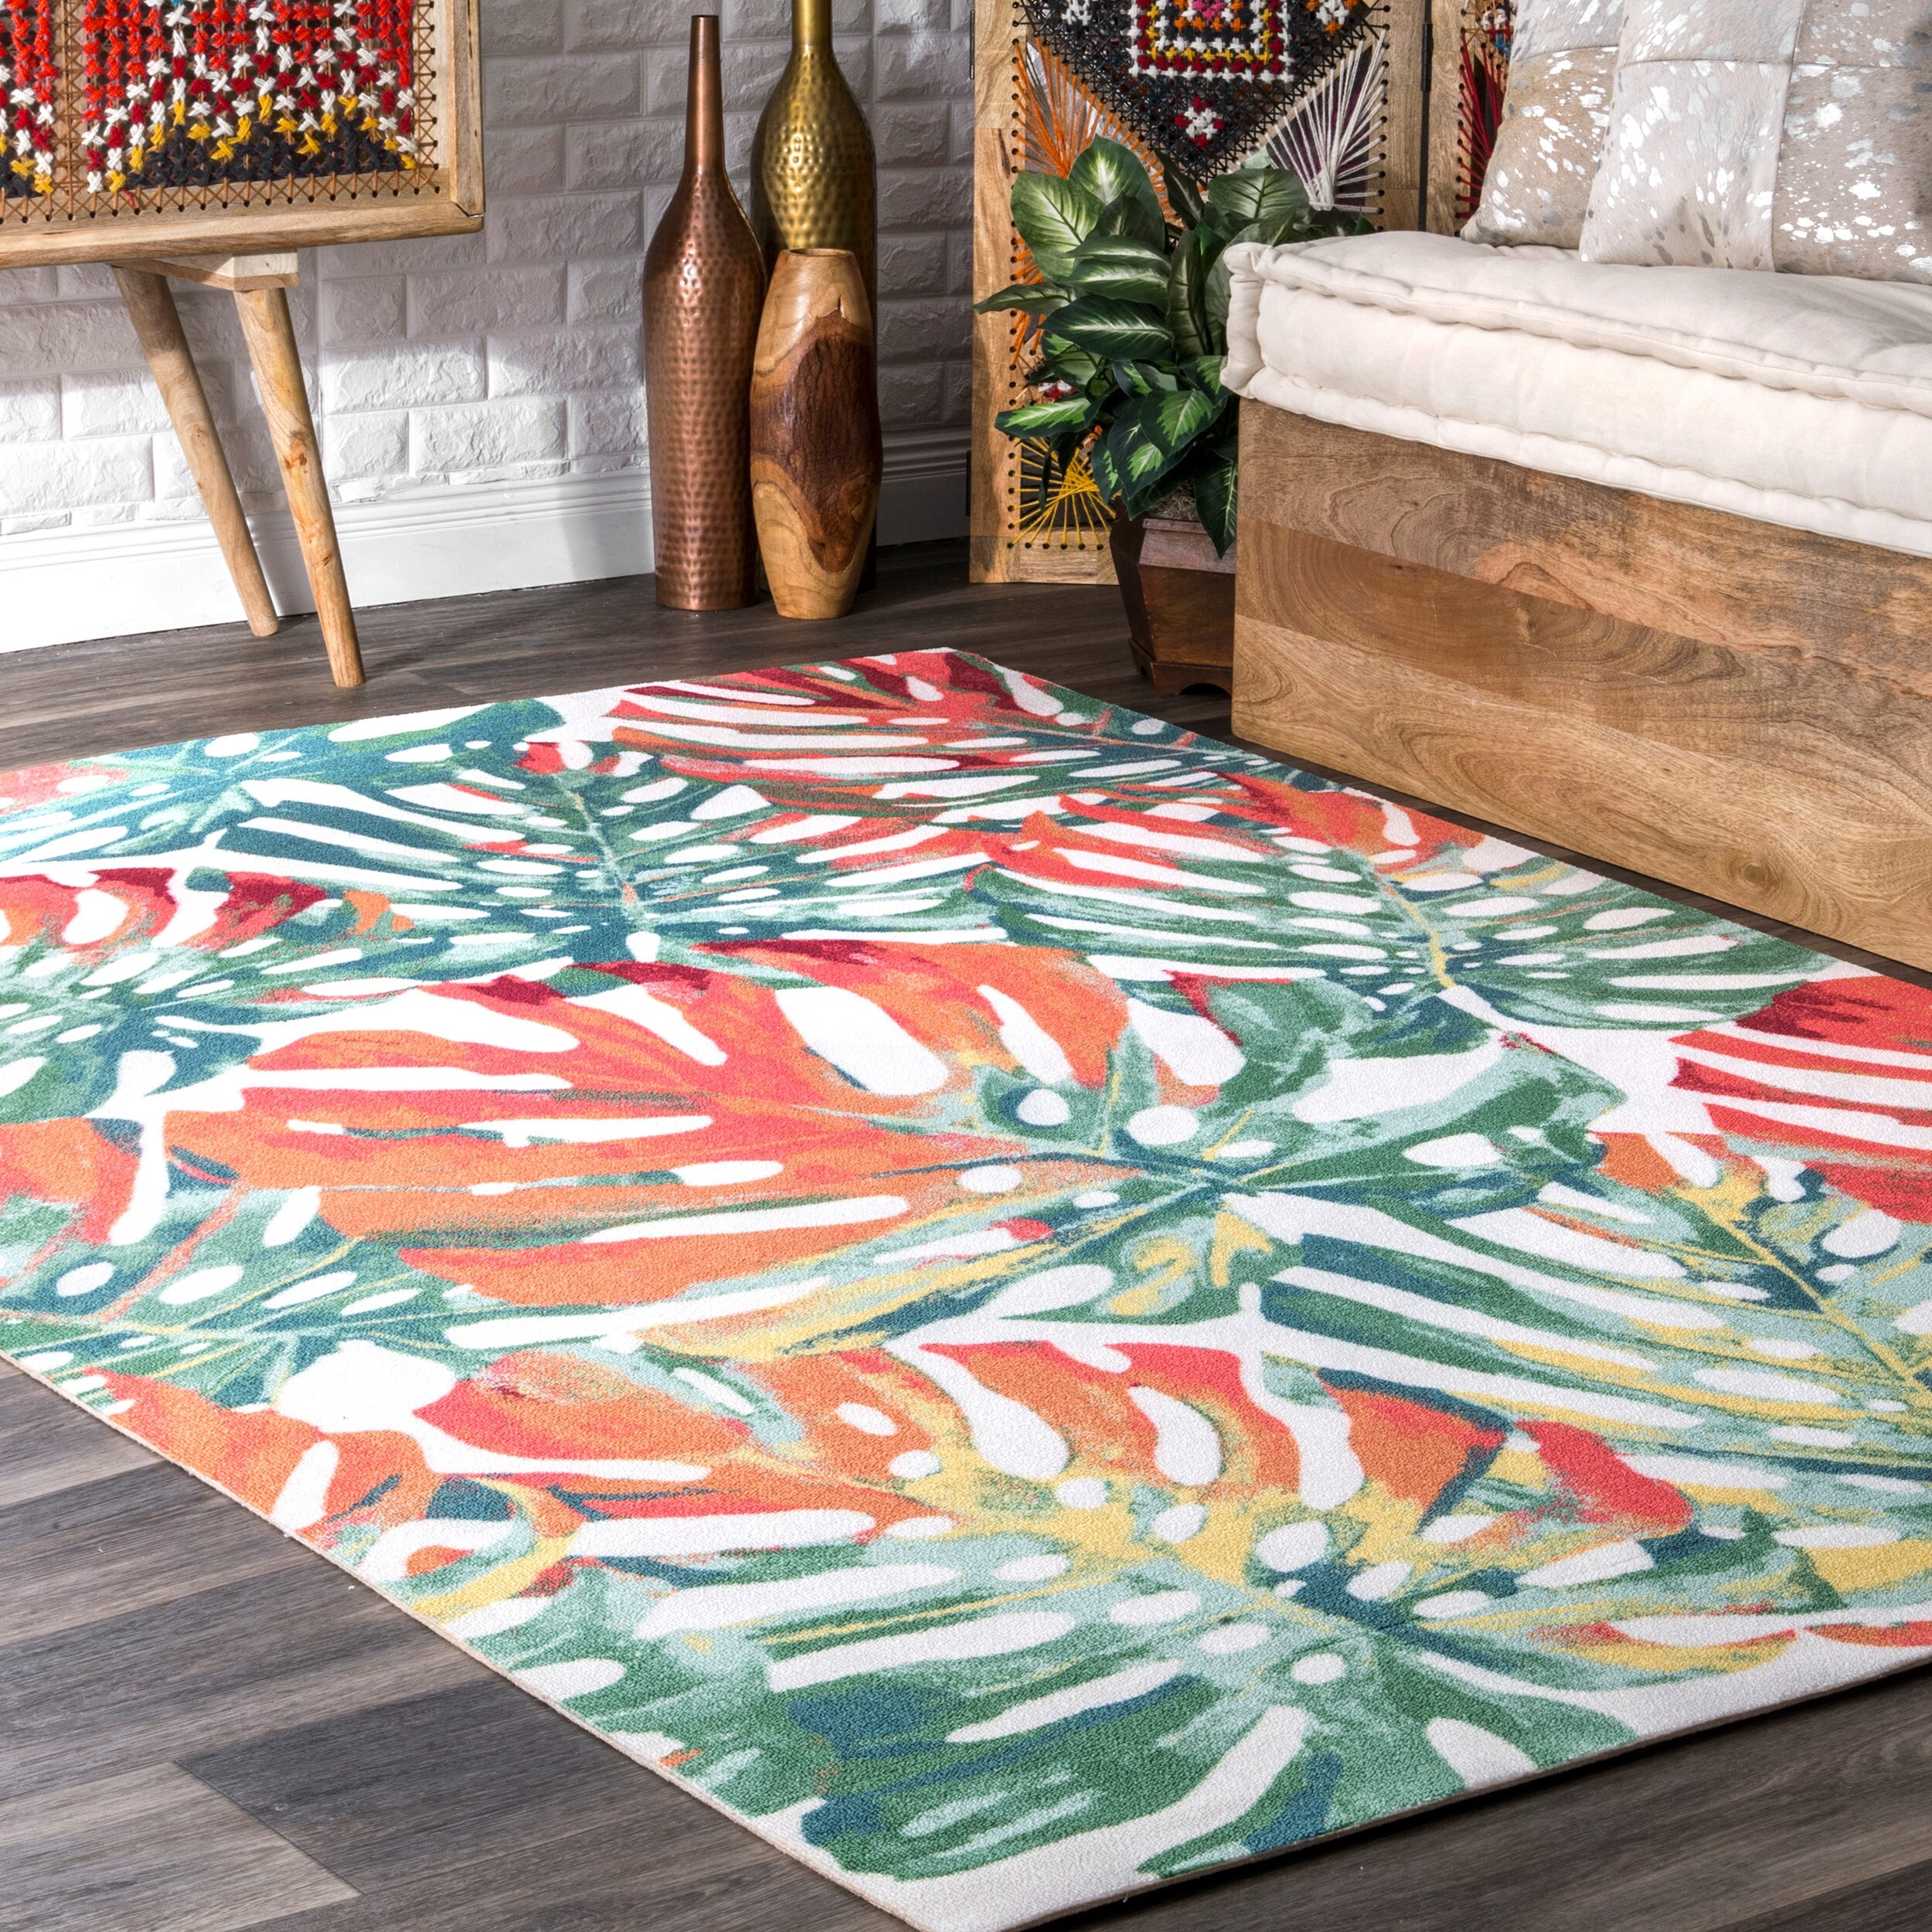 ALAZA Tropical Palm Tree Leaves Watercolor Area Rug Rugs for Living Room Bedroom 3'x2' 